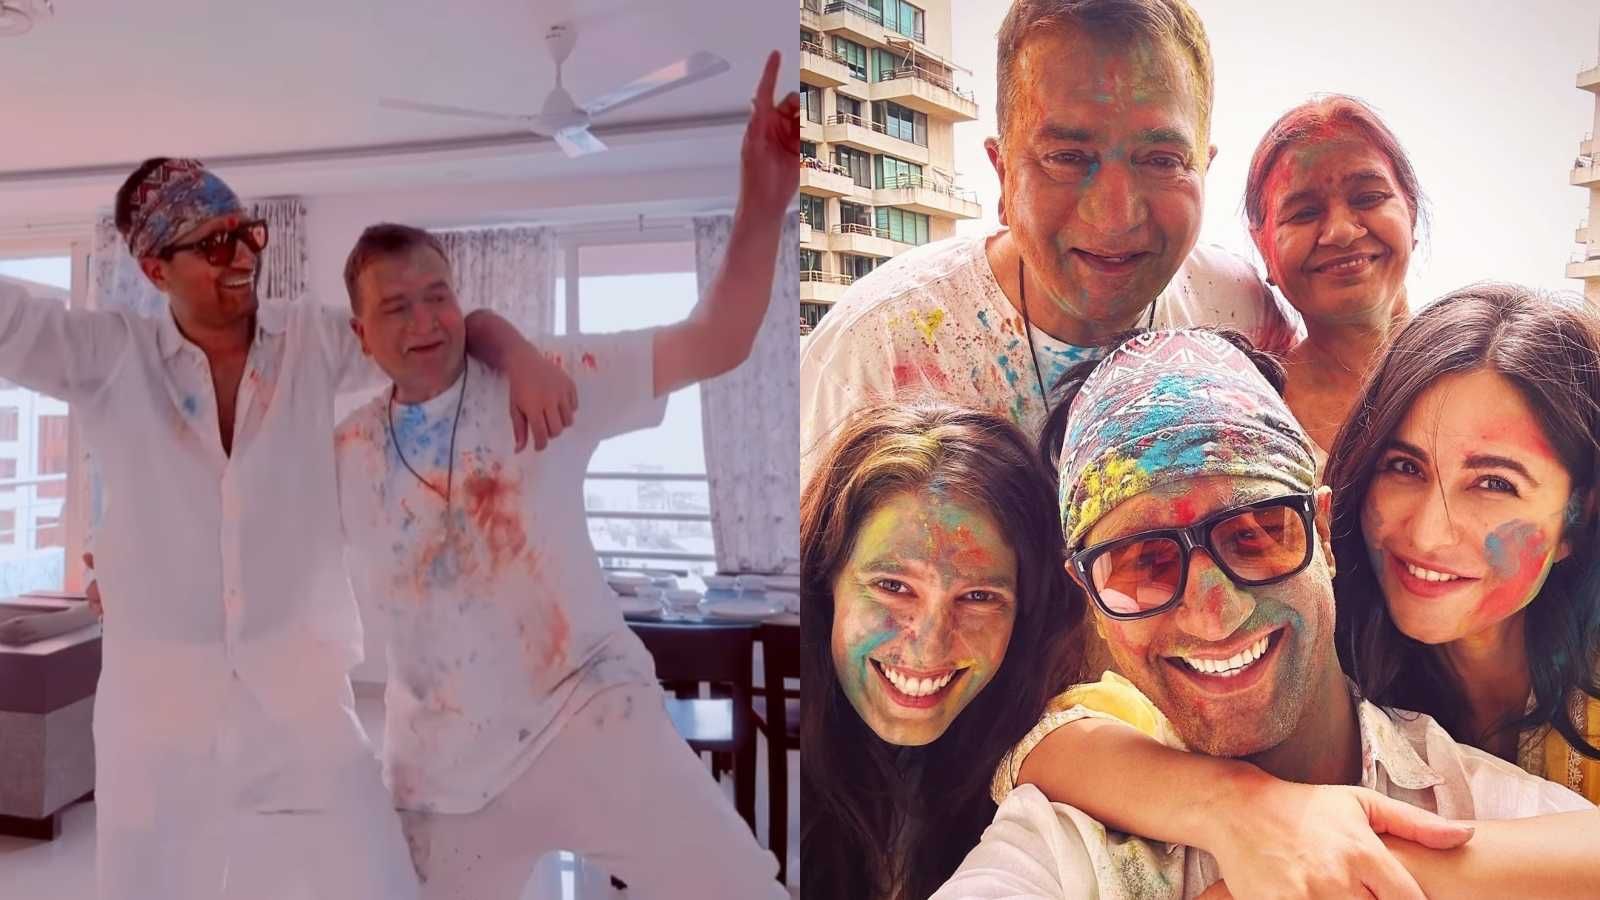 Sham Kaushal takes dance lessons from son Vicky Kaushal during homely Holi celebration, Katrina Kaif's adorable moment steals the show; Watch